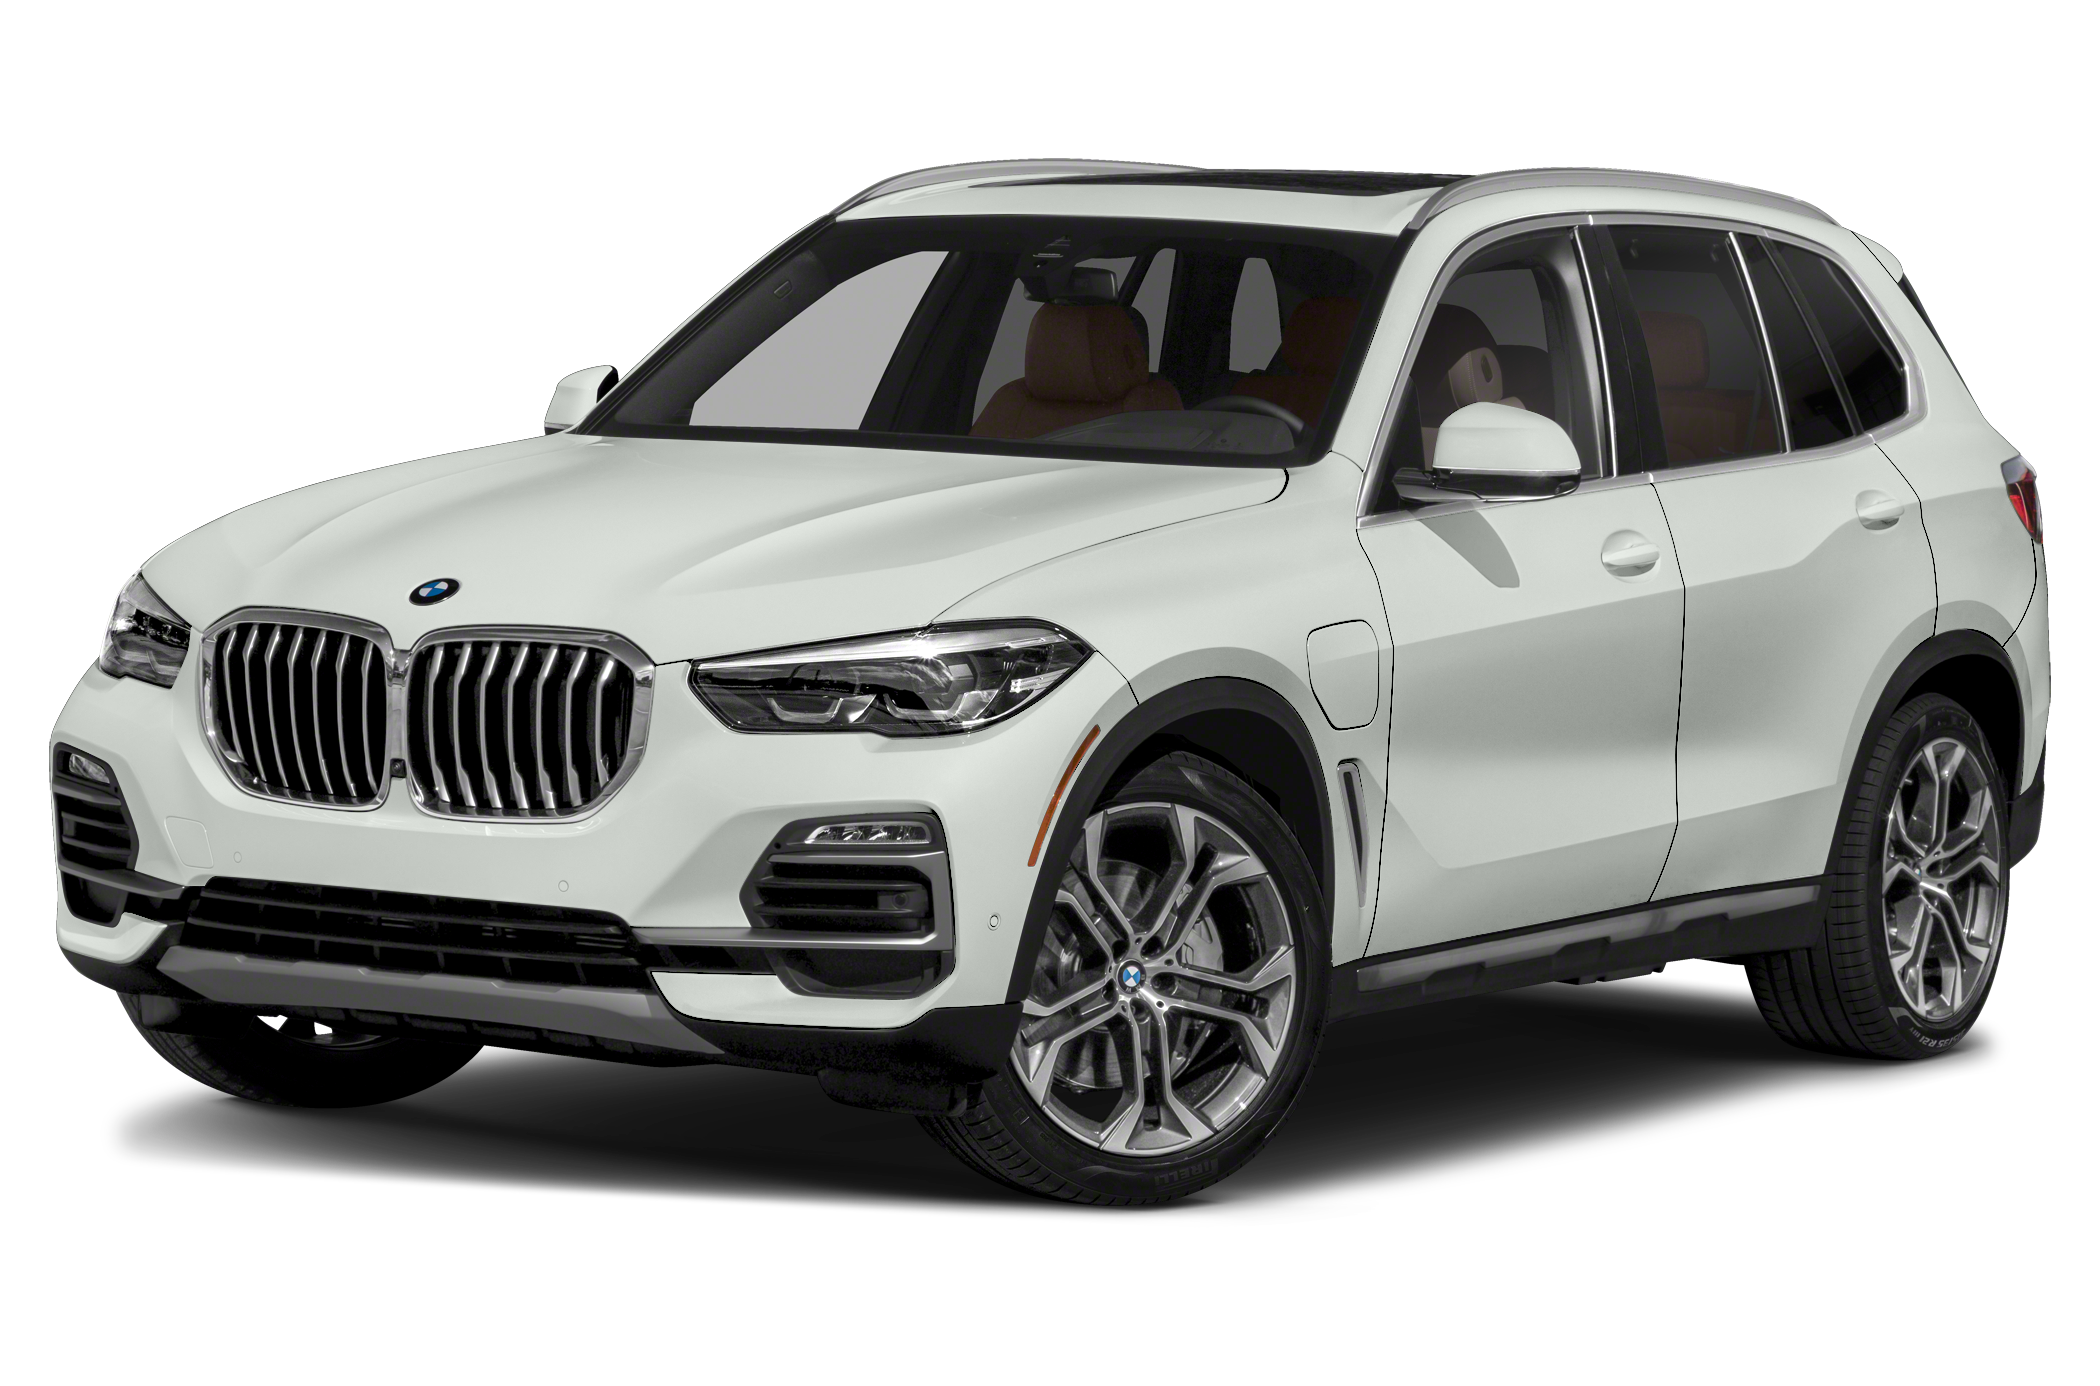  BMW X5 oem parts and accessories on sale